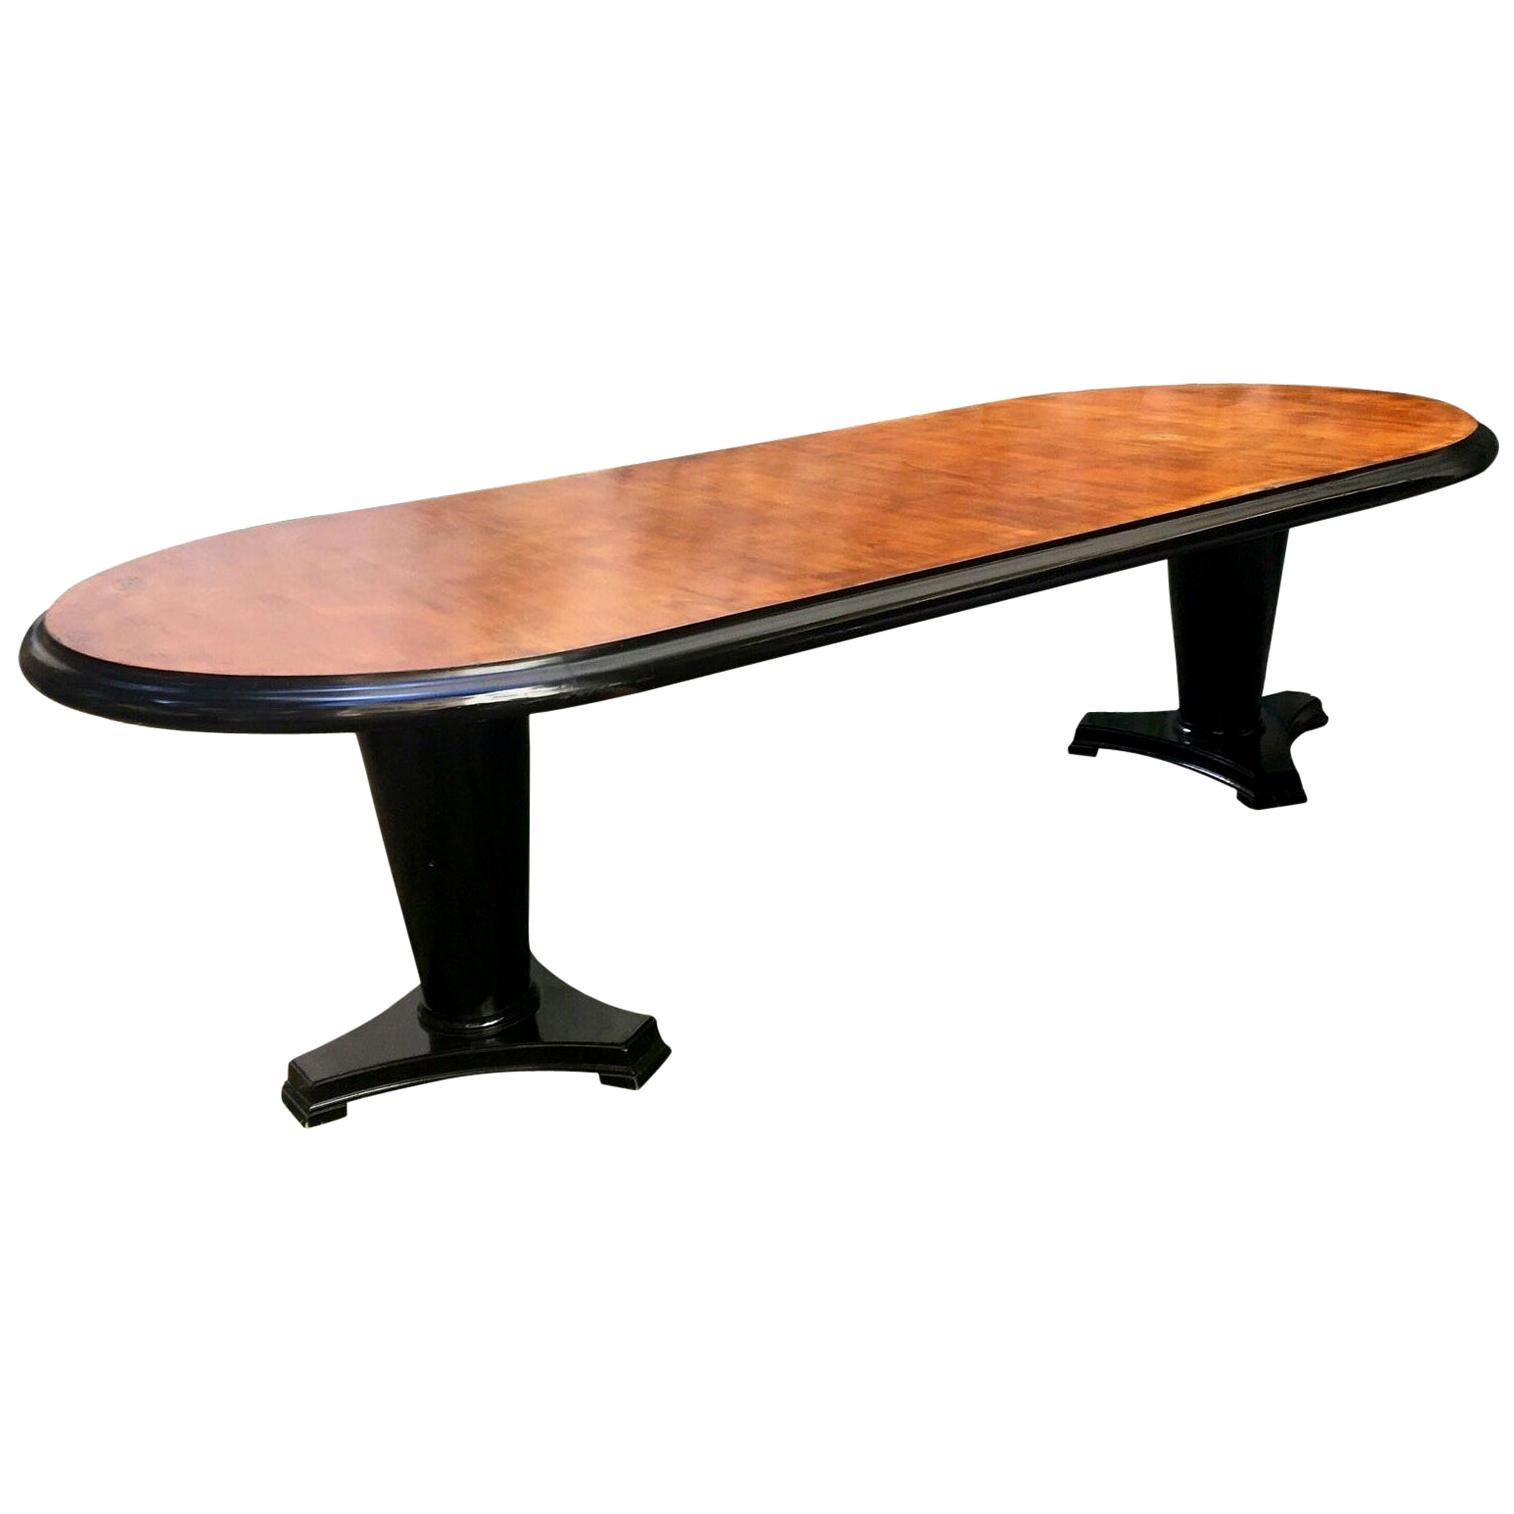 Art Deco Oval Dining Table in Mahogany Wood with Black Ebonized Edge, 1940s For Sale